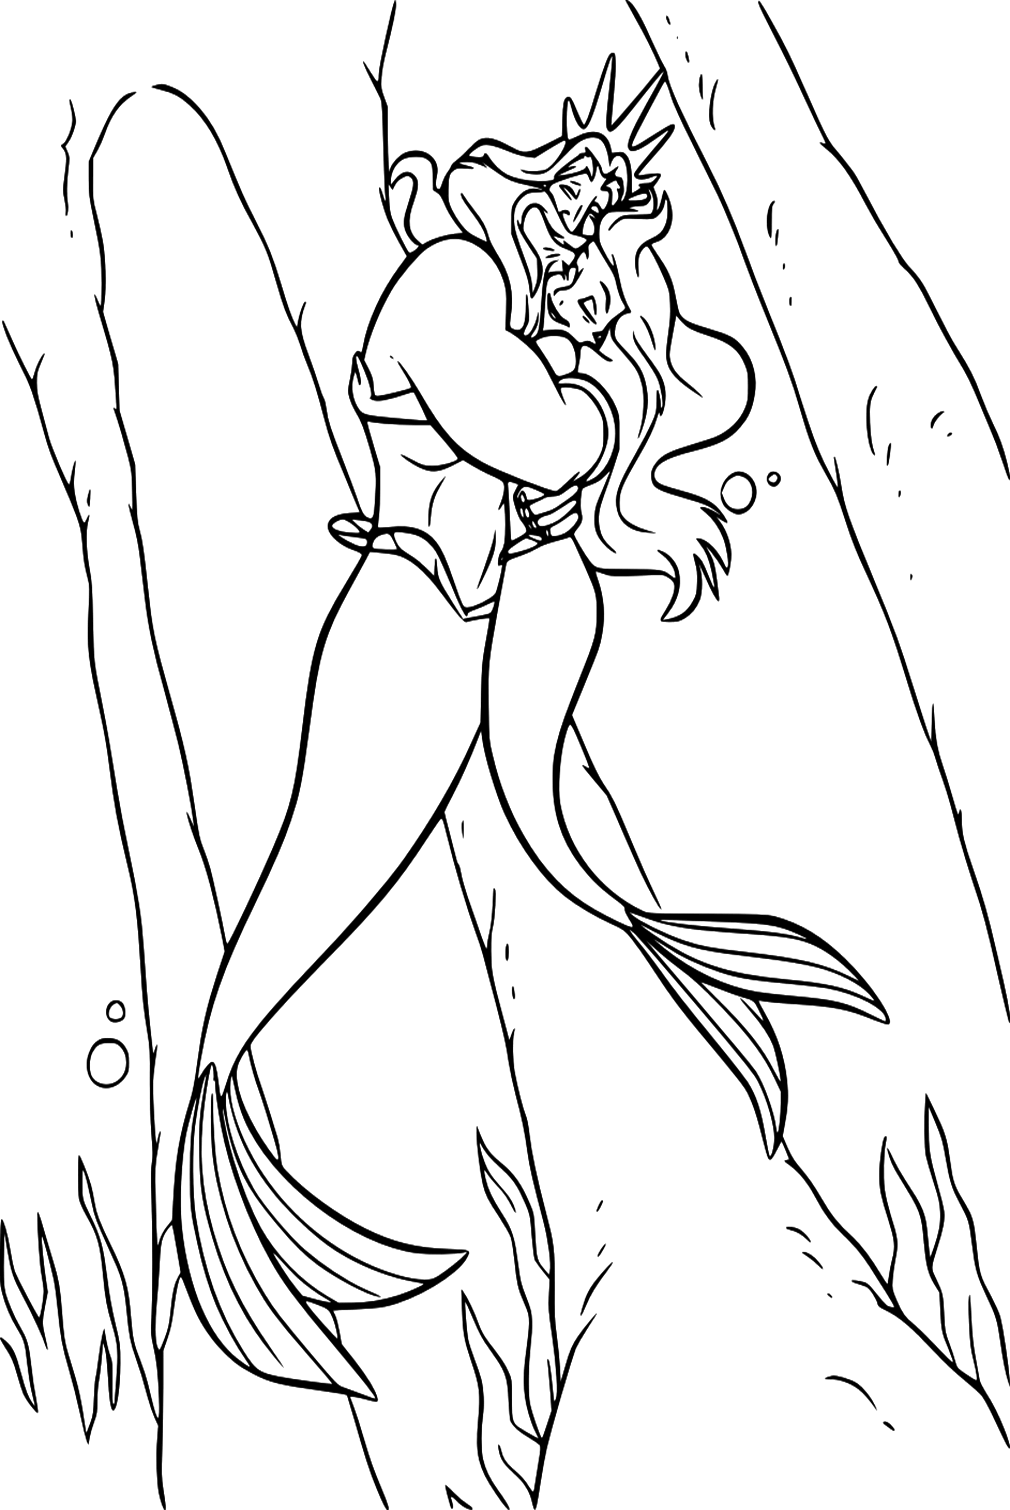 King Triton With Ariel Coloring Page from The Little Mermaid